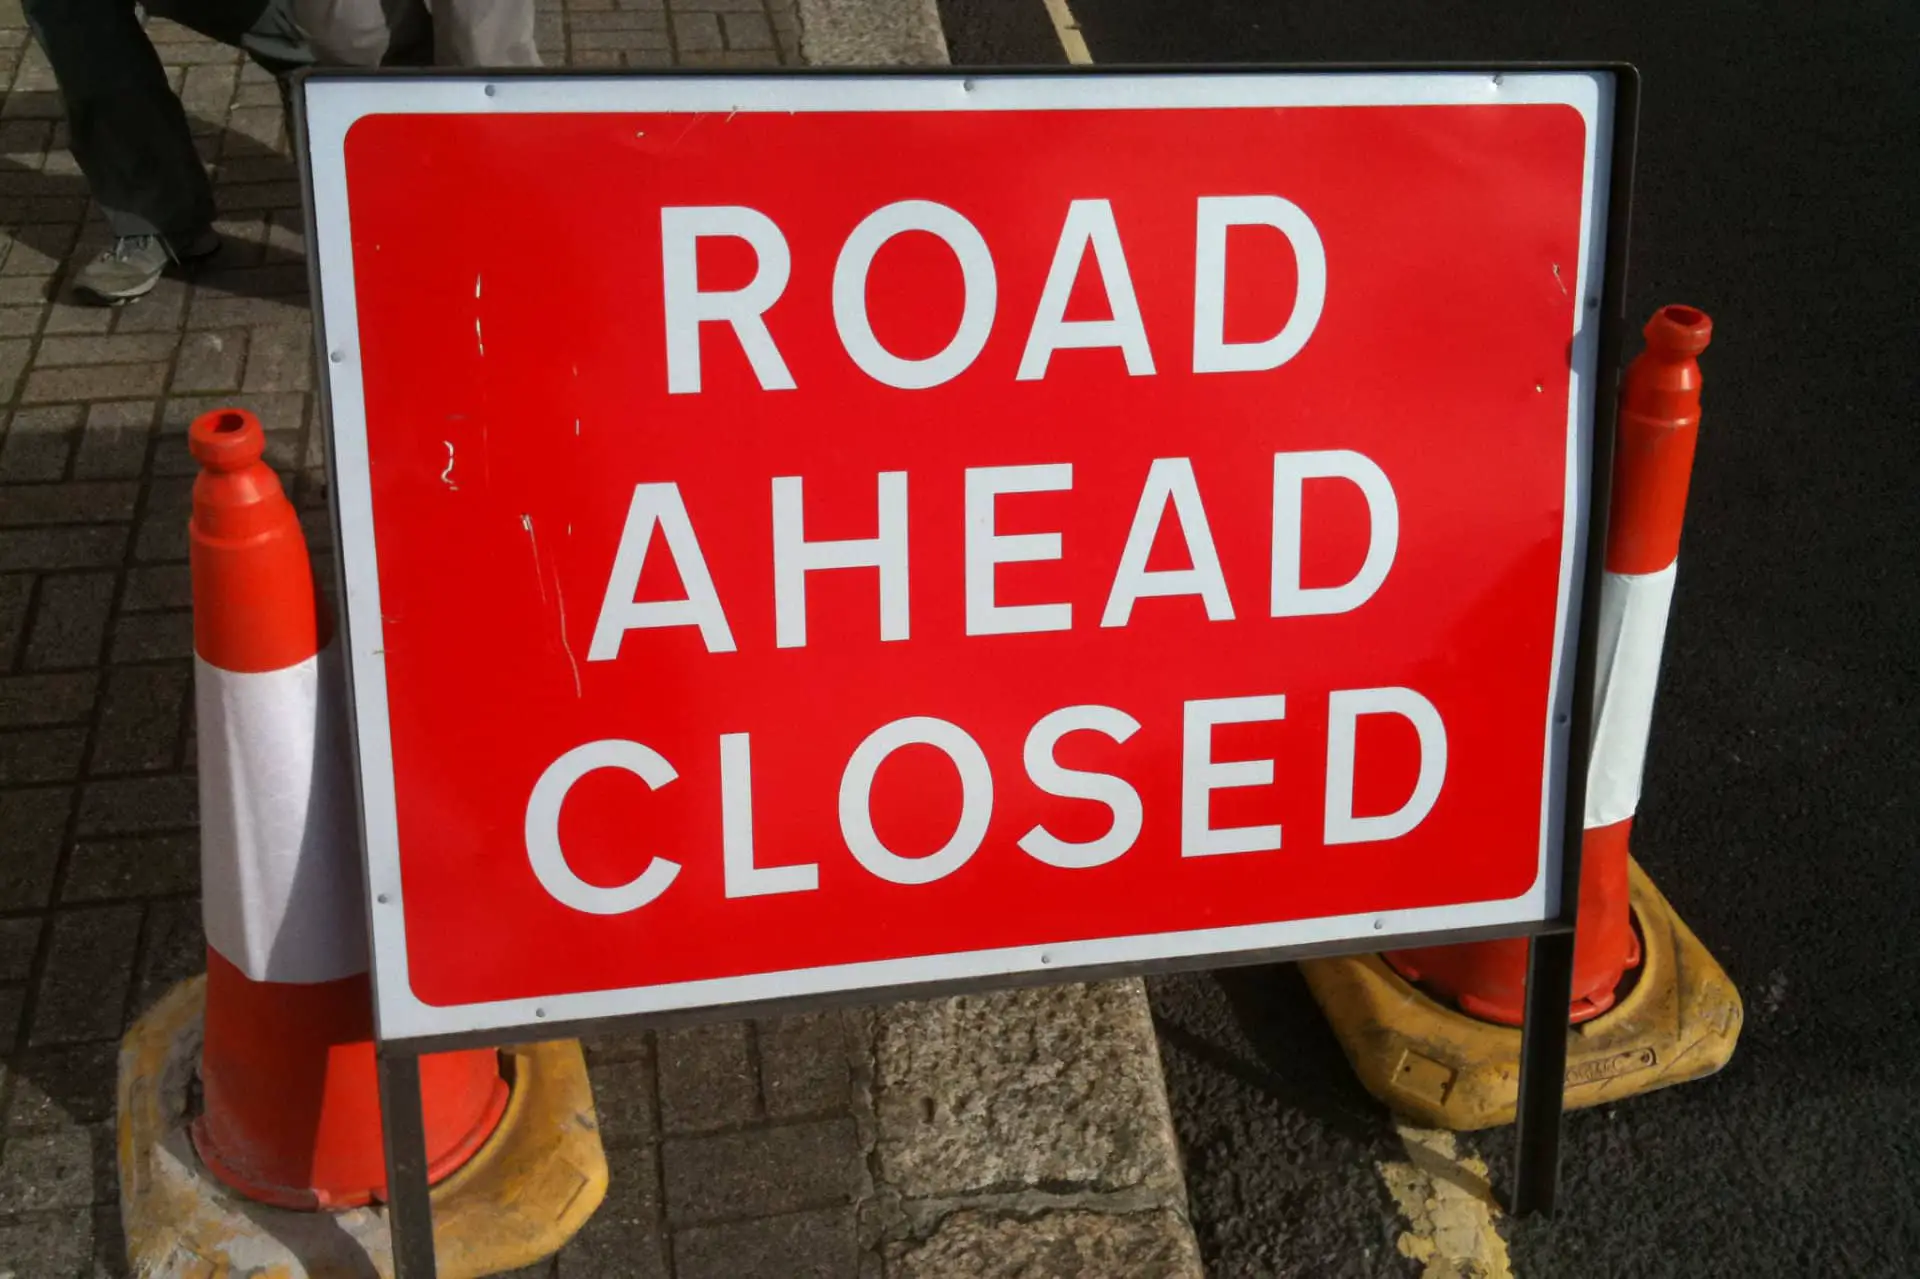 Road closed sign source